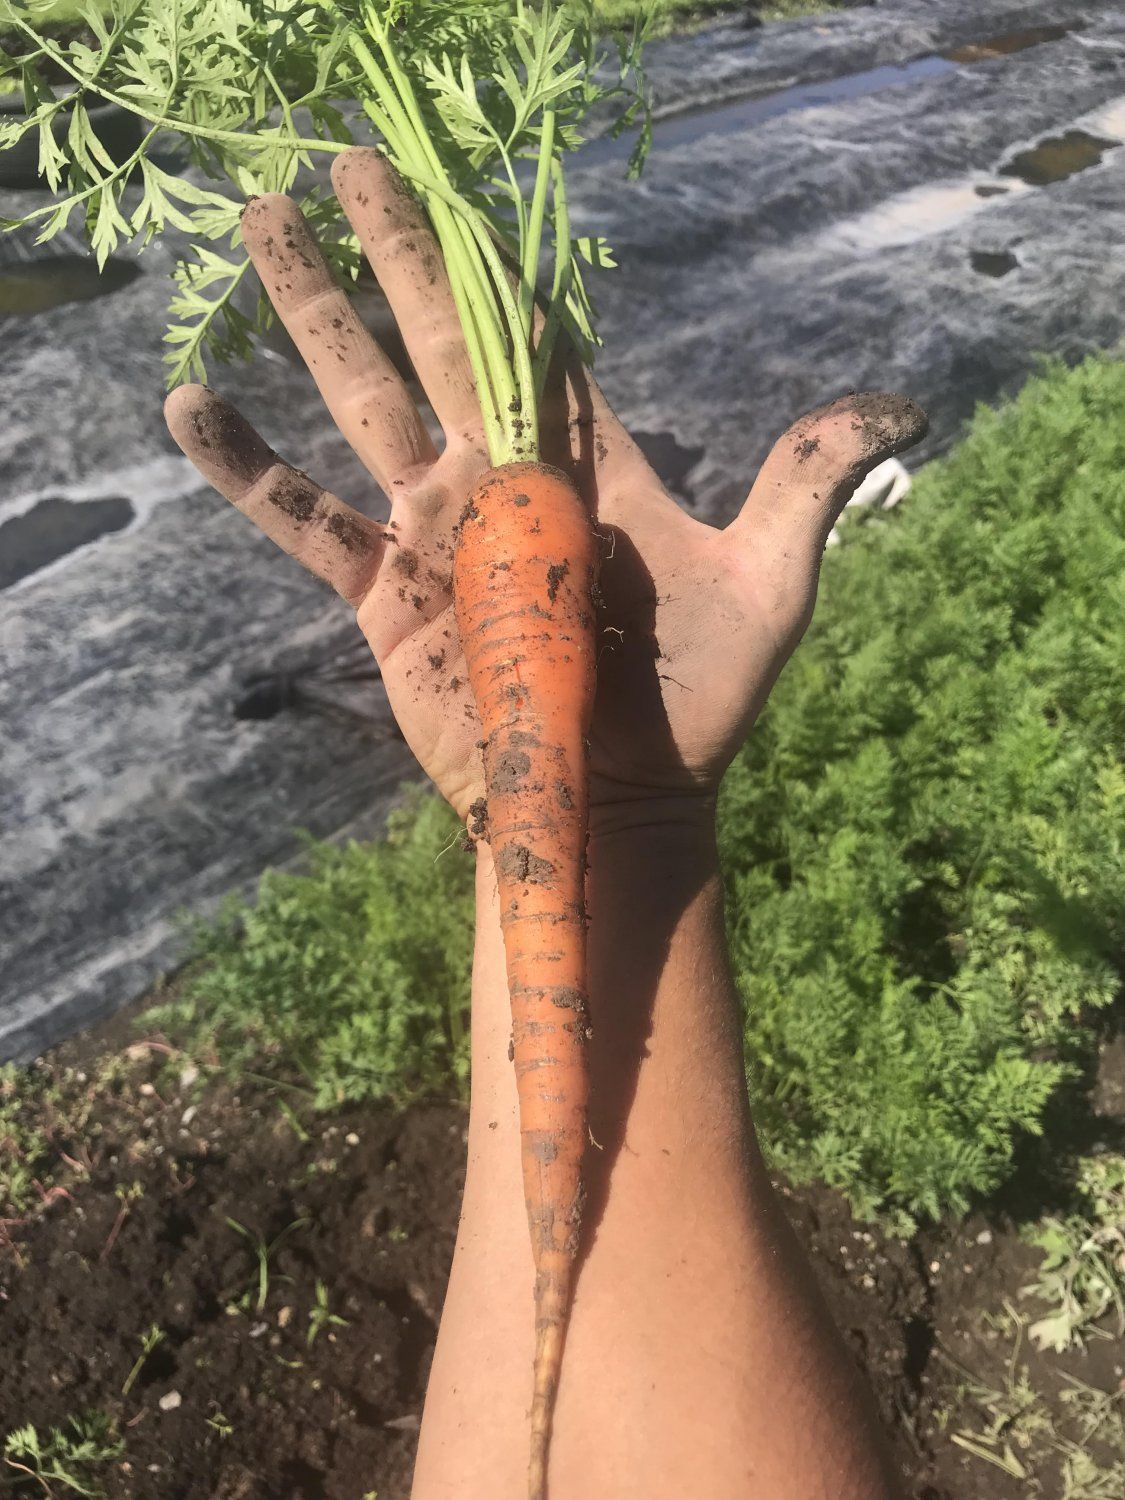 Previous Happening: Common Roots Urban Farm Newsletter Week #9